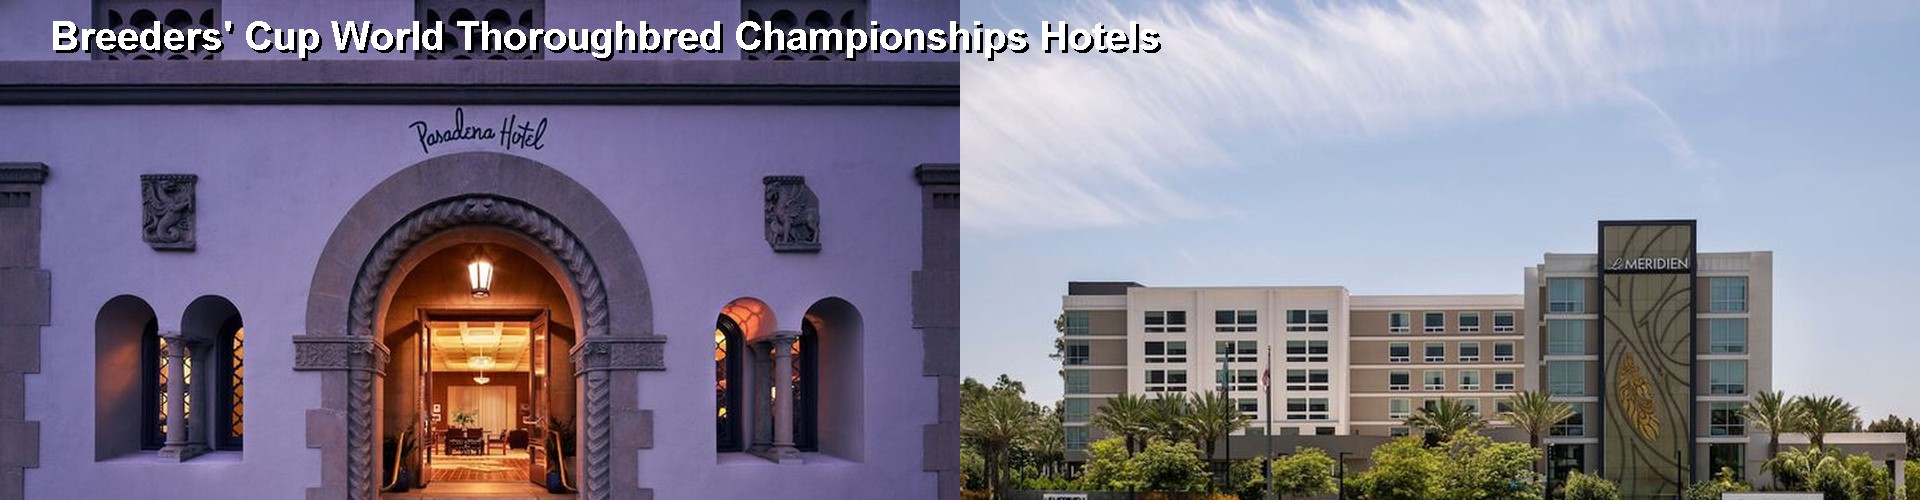 4 Best Hotels near Breeders' Cup World Thoroughbred Championships